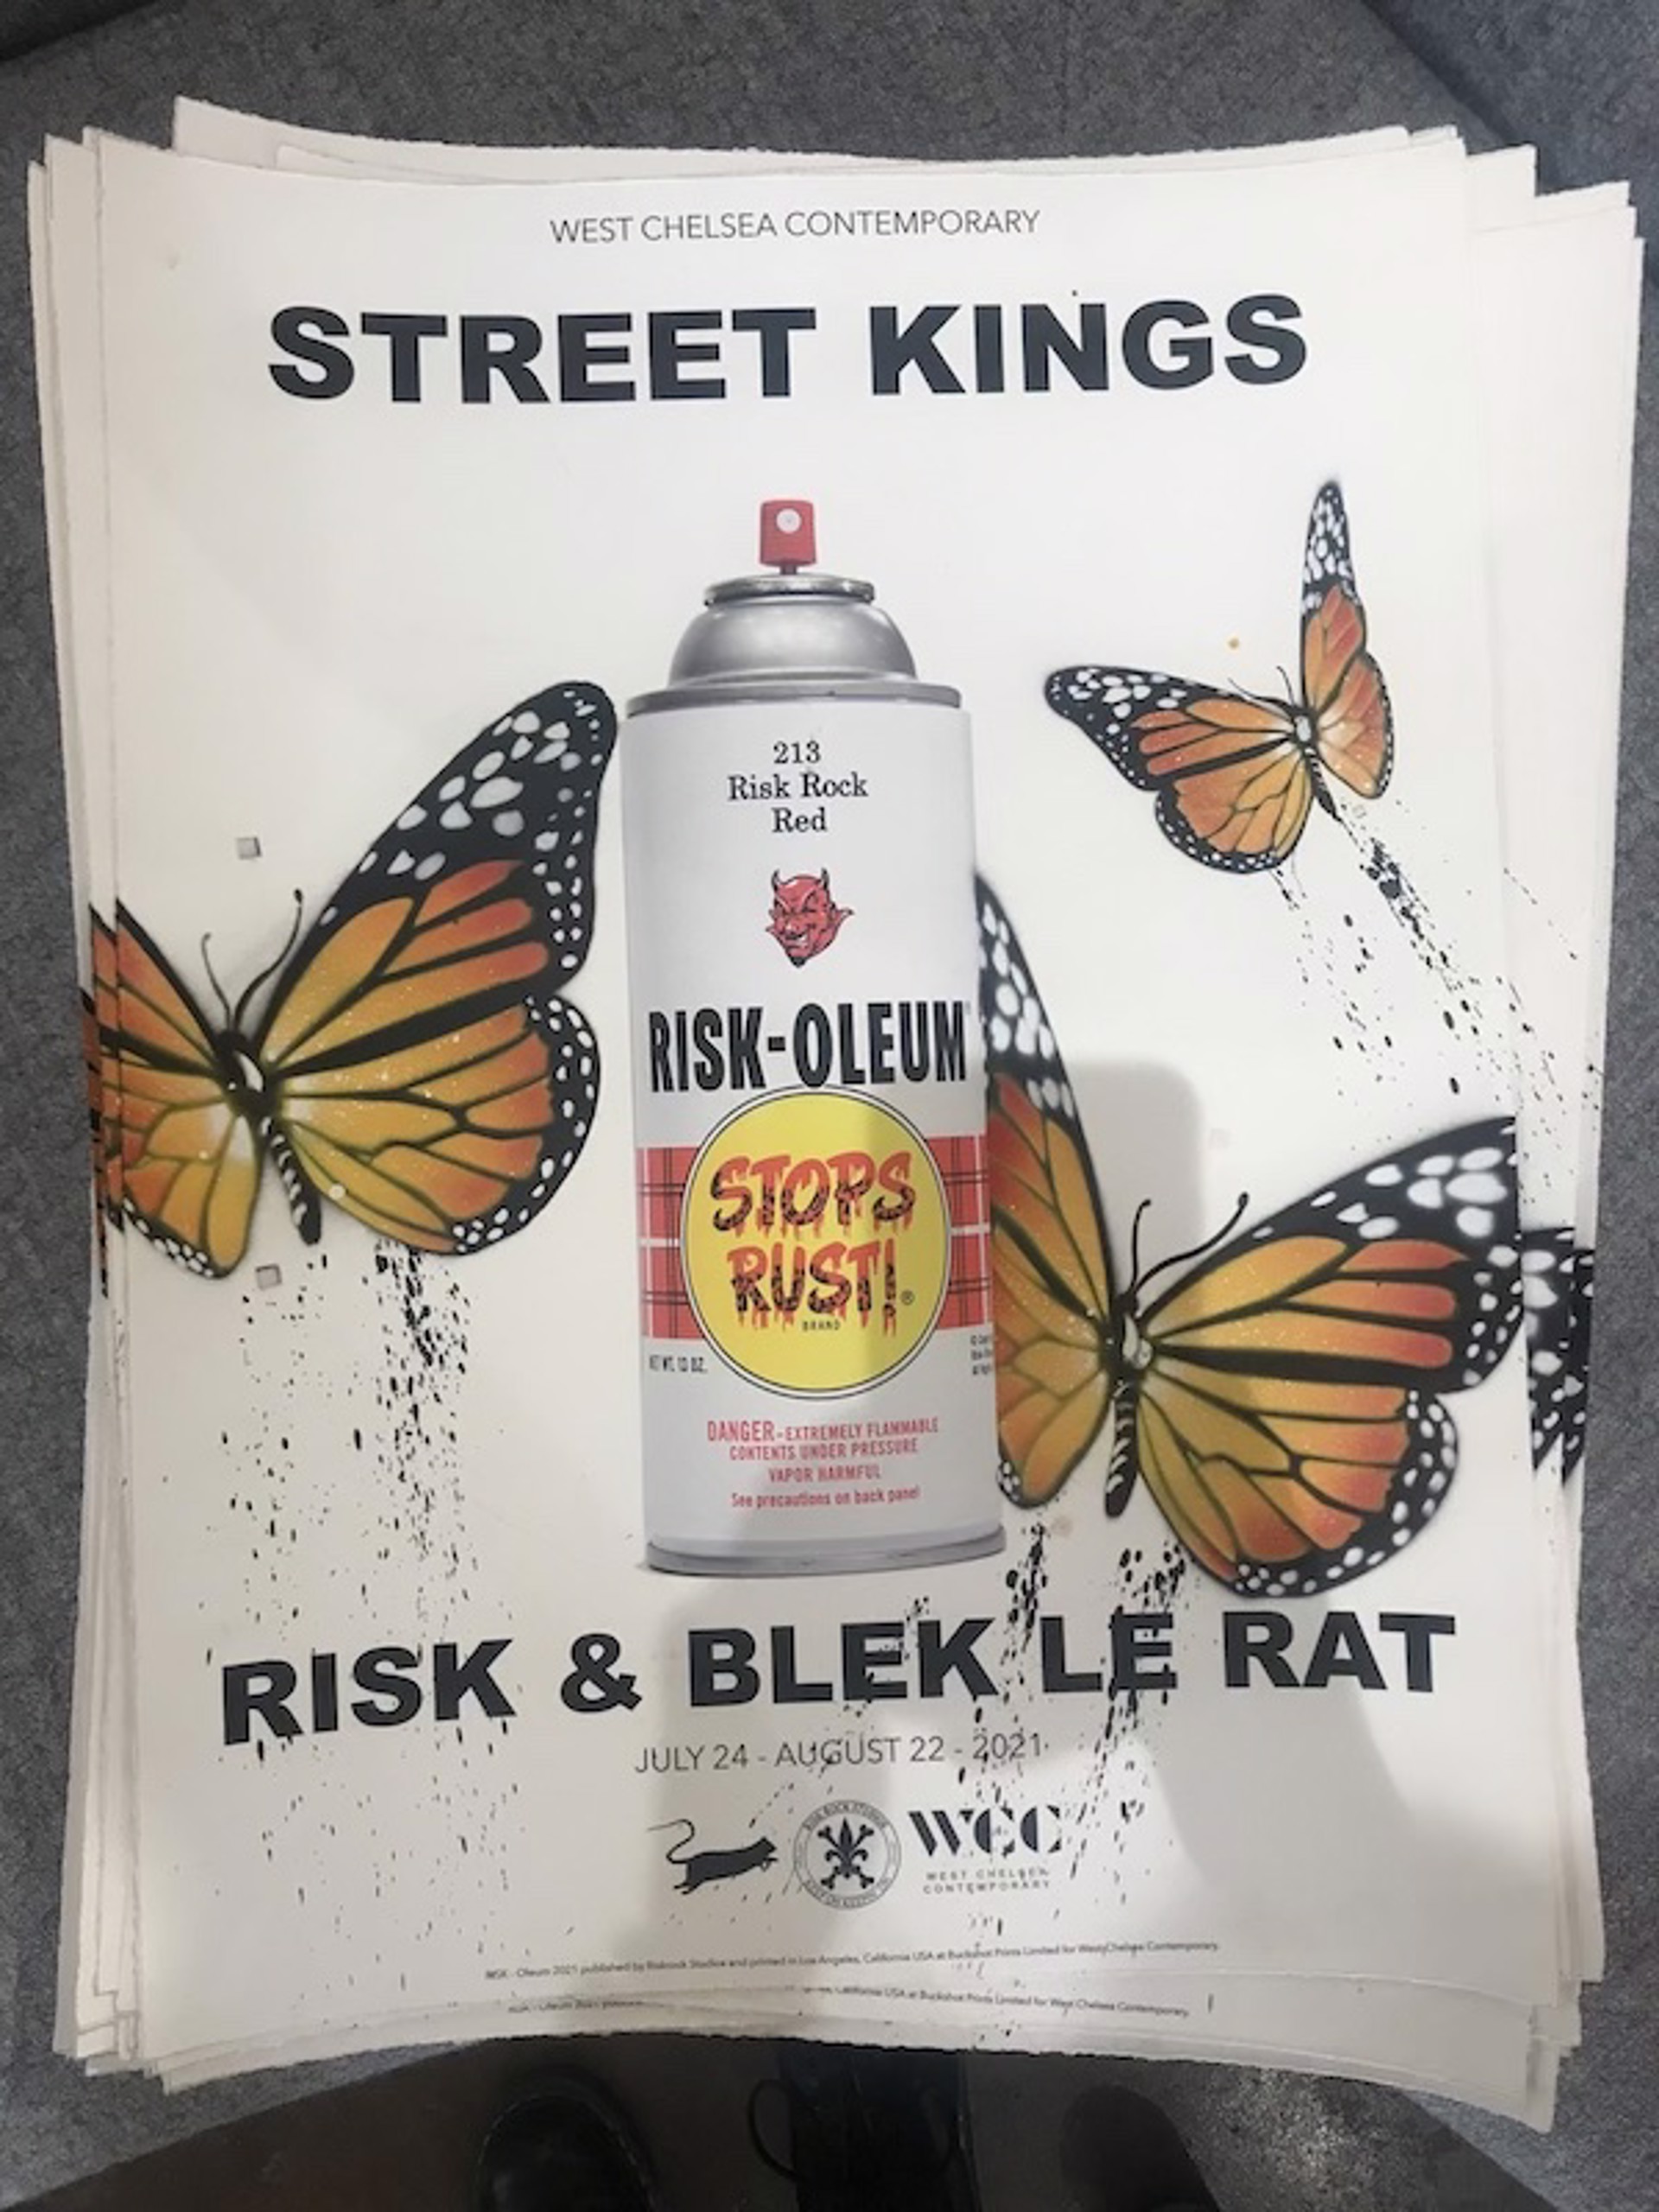 Street Kings Show Print (9/50) by Risk